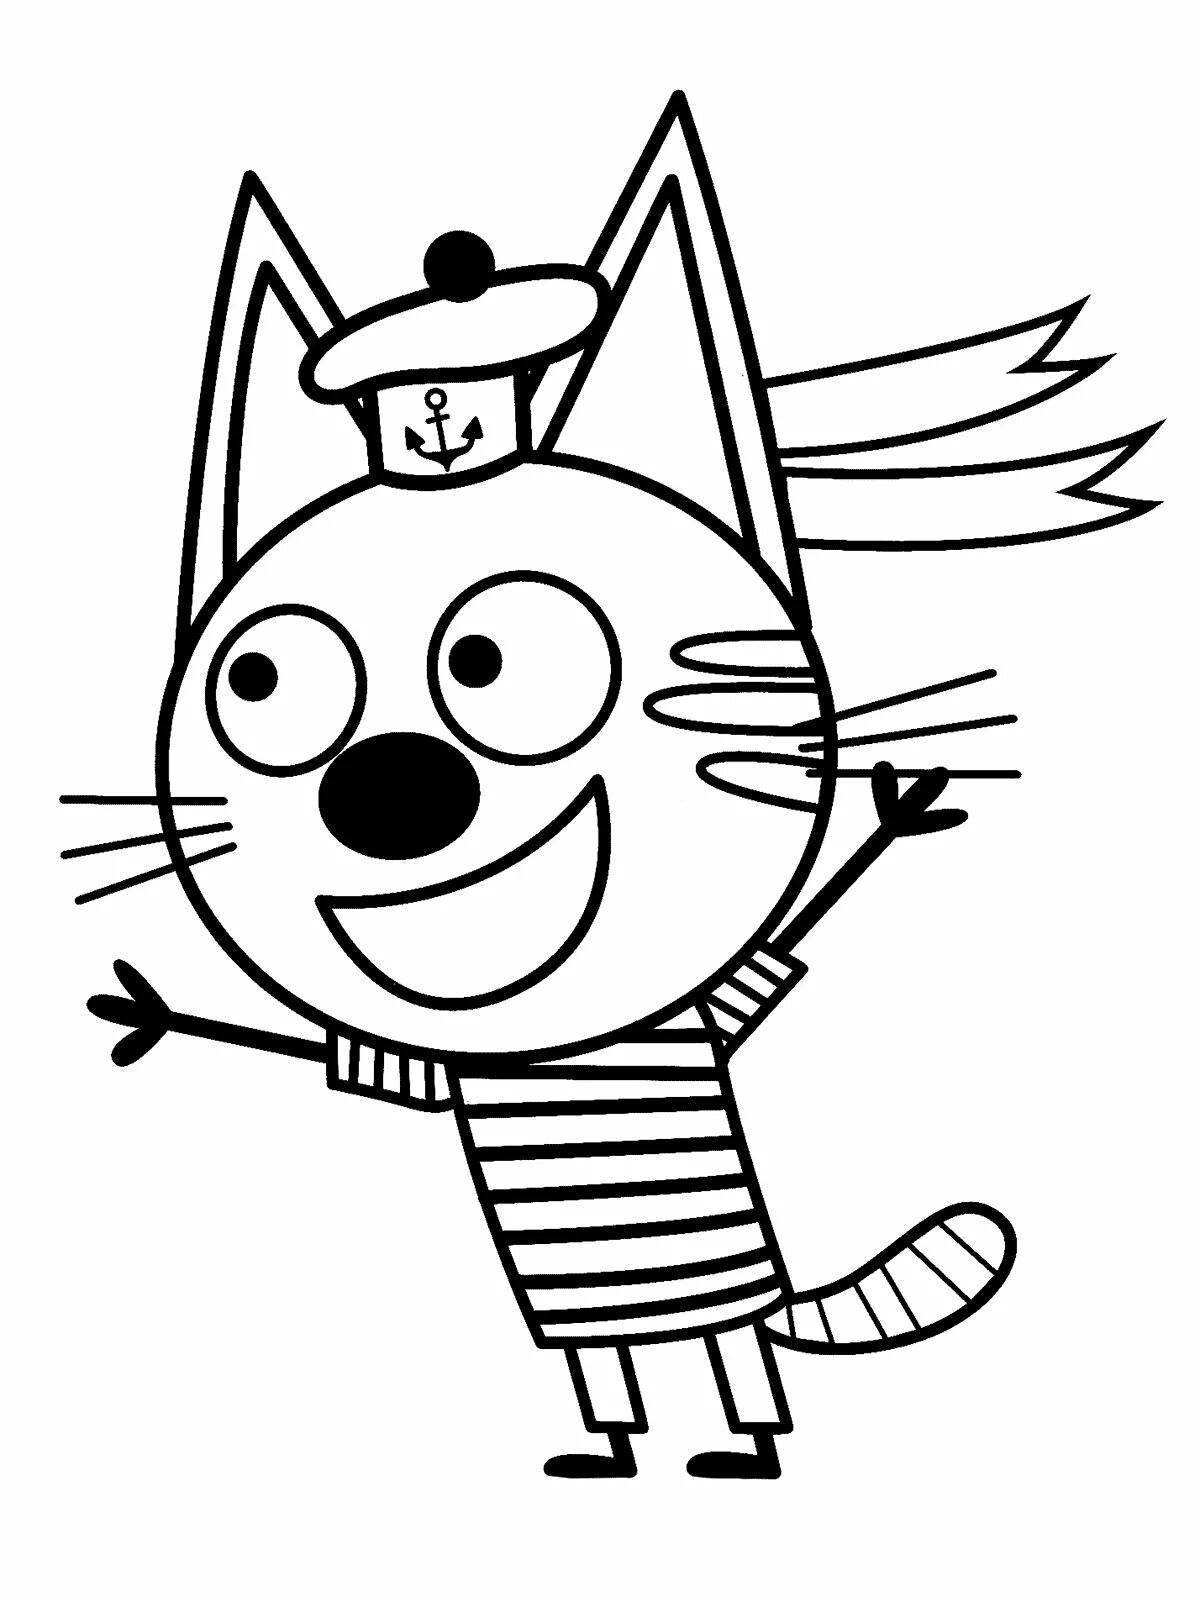 3 cats amazing coloring pages for kids